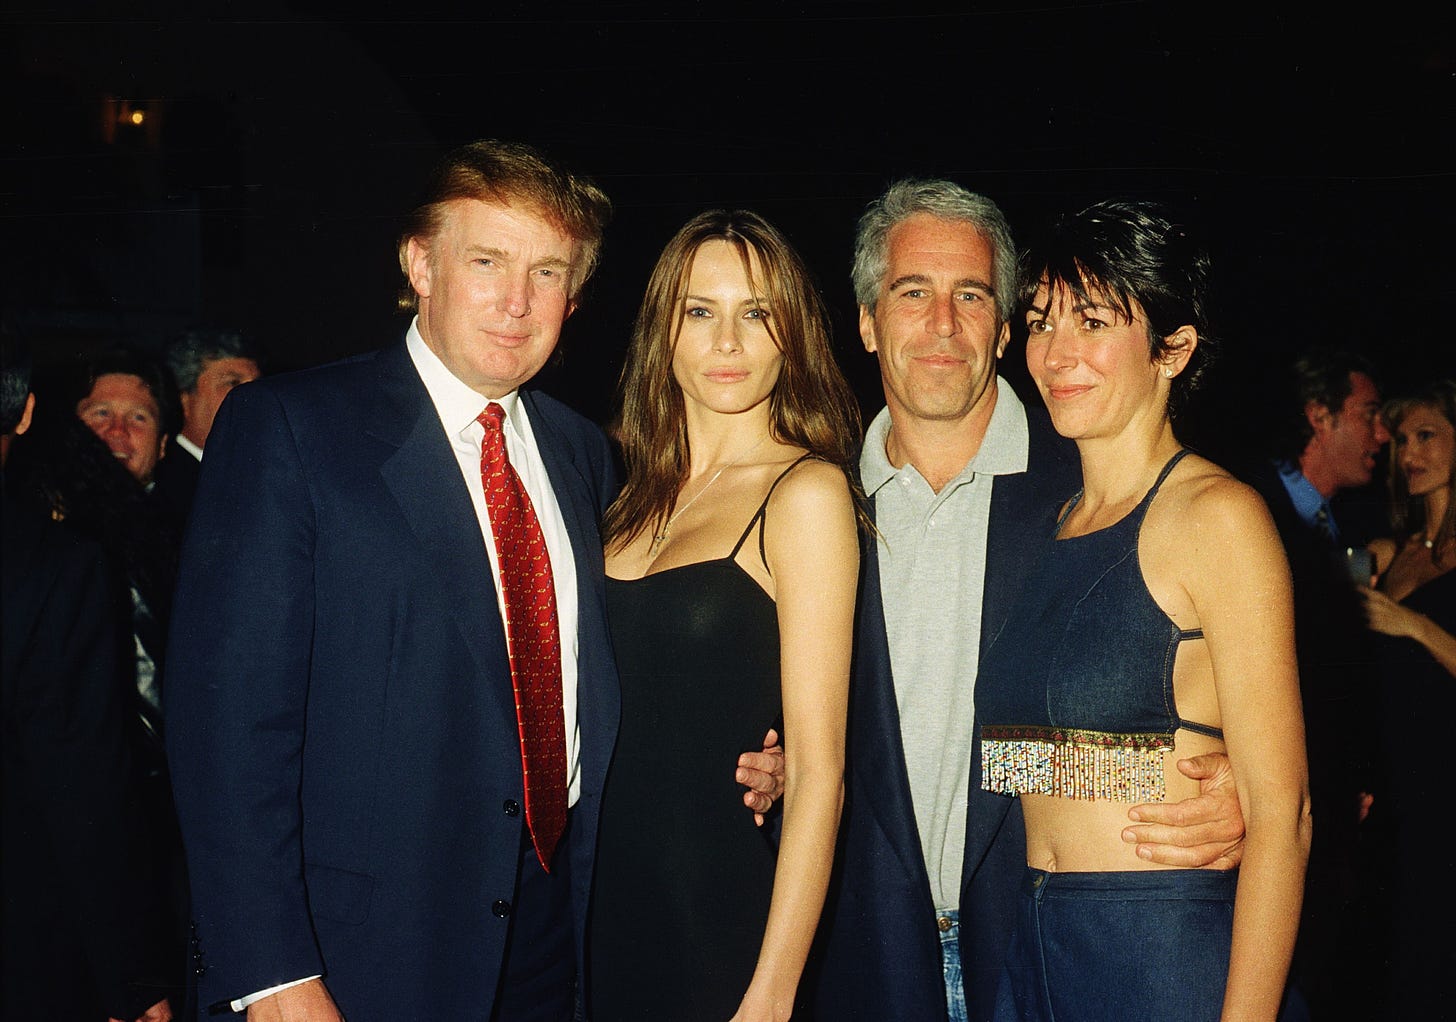 Donald Trump and his then-girlfriend Melania Knauss, Epstein, and Maxwell pose together at the Mar-a-Lago club, Palm Beach, Florida, February 12, 2000